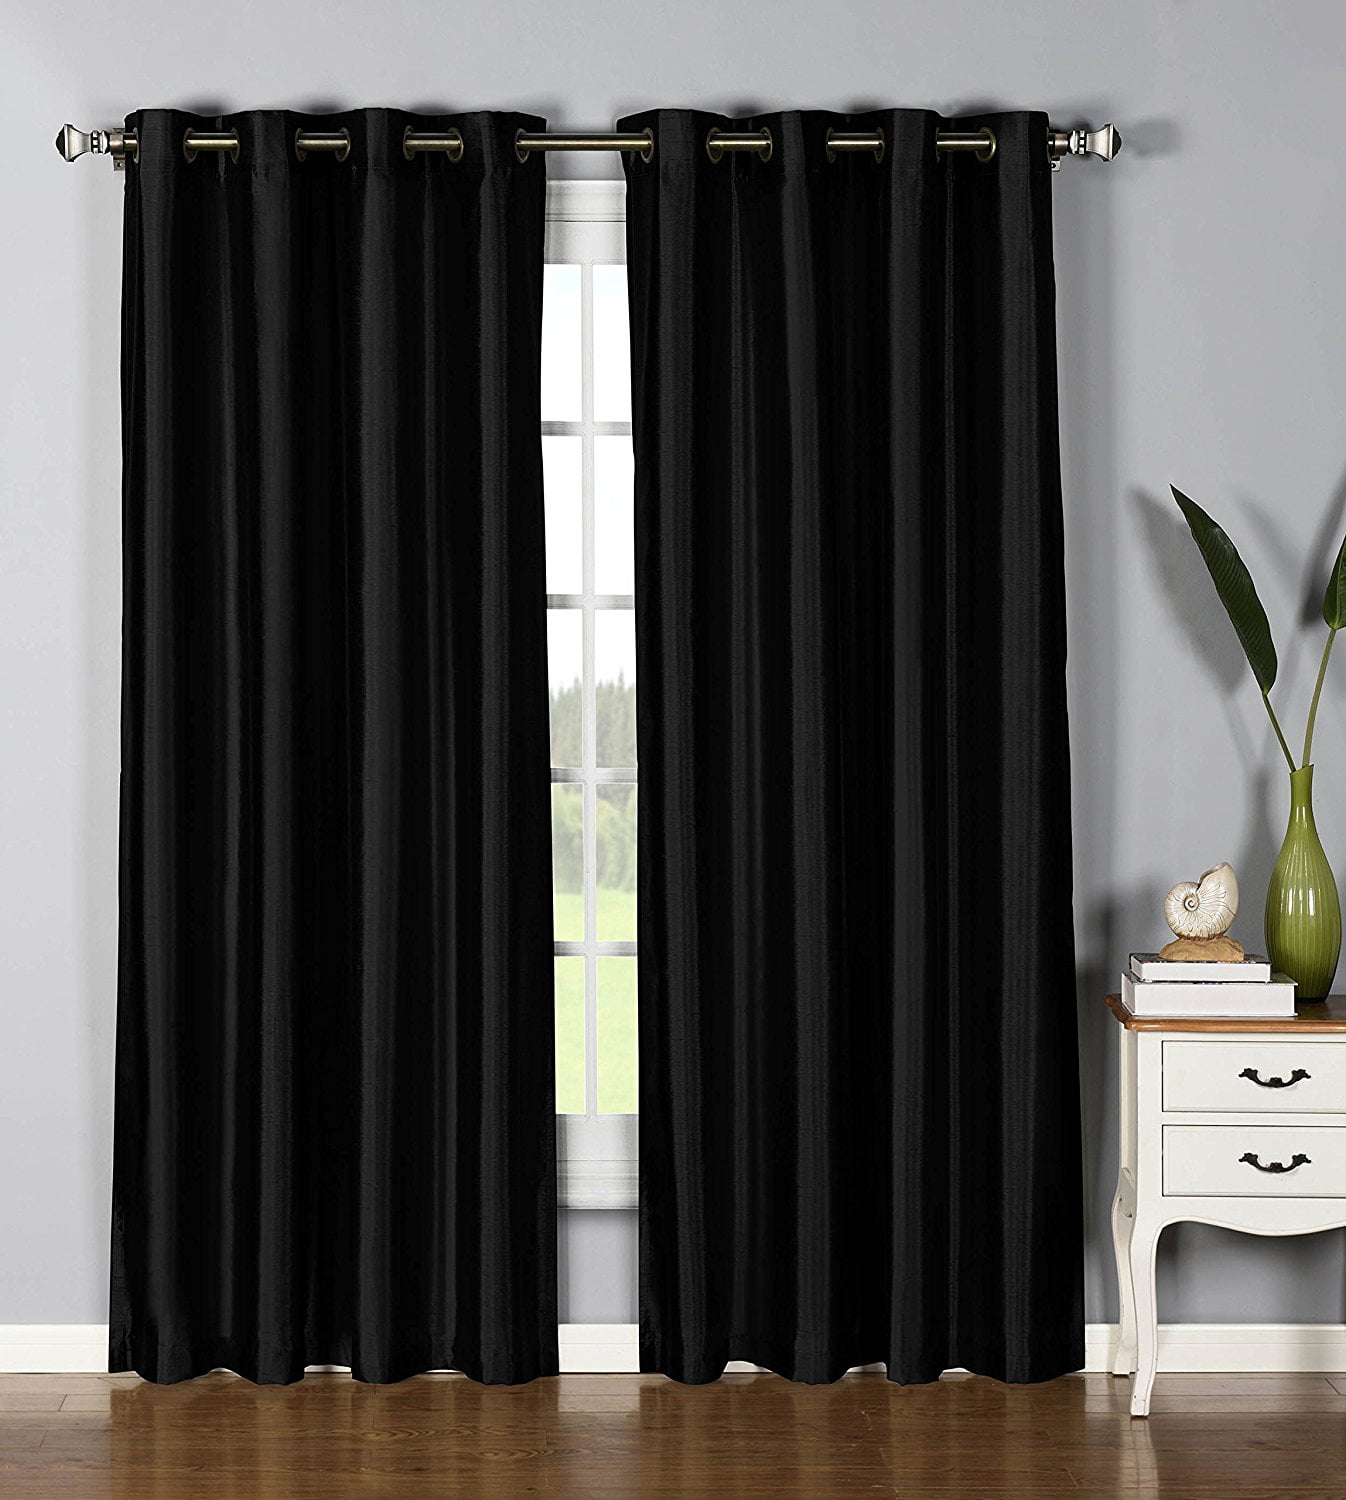 Tiebacks in 8 Sizes Black Lined Faux Silk Curtains 